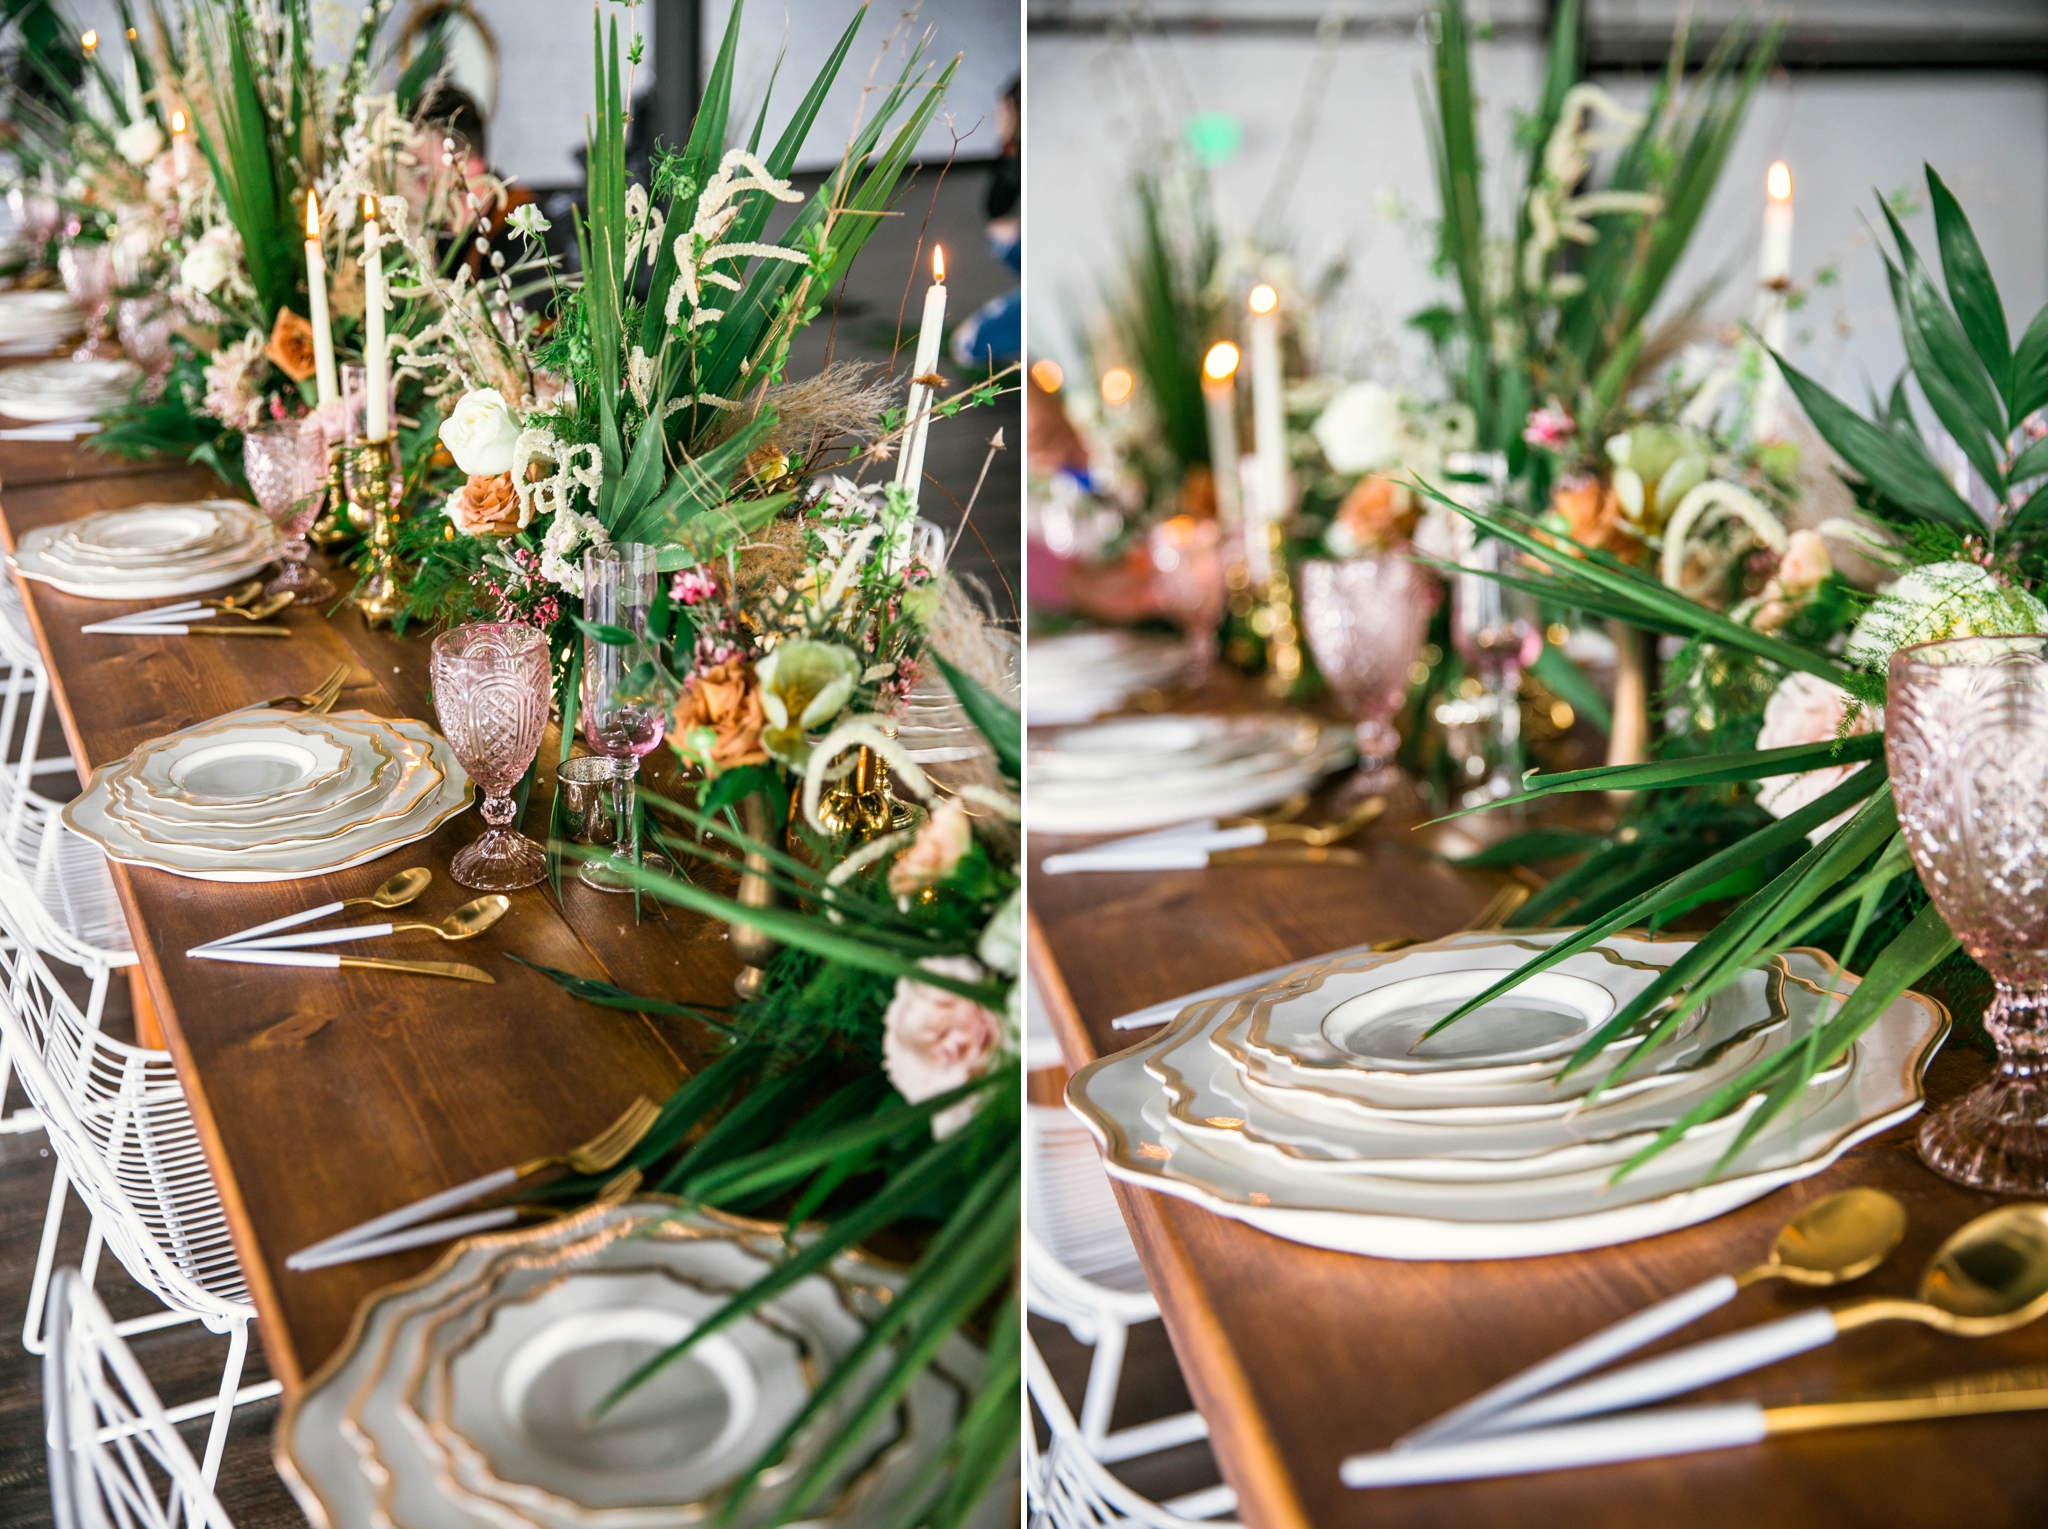  Wedding Table Setting with white and gold plates, pink glass wear, gold and white silverware - colorful flowers and tropical center piece - Destination Wedding Inspiration - Honolulu, Oahu, Hawaii Photographer 